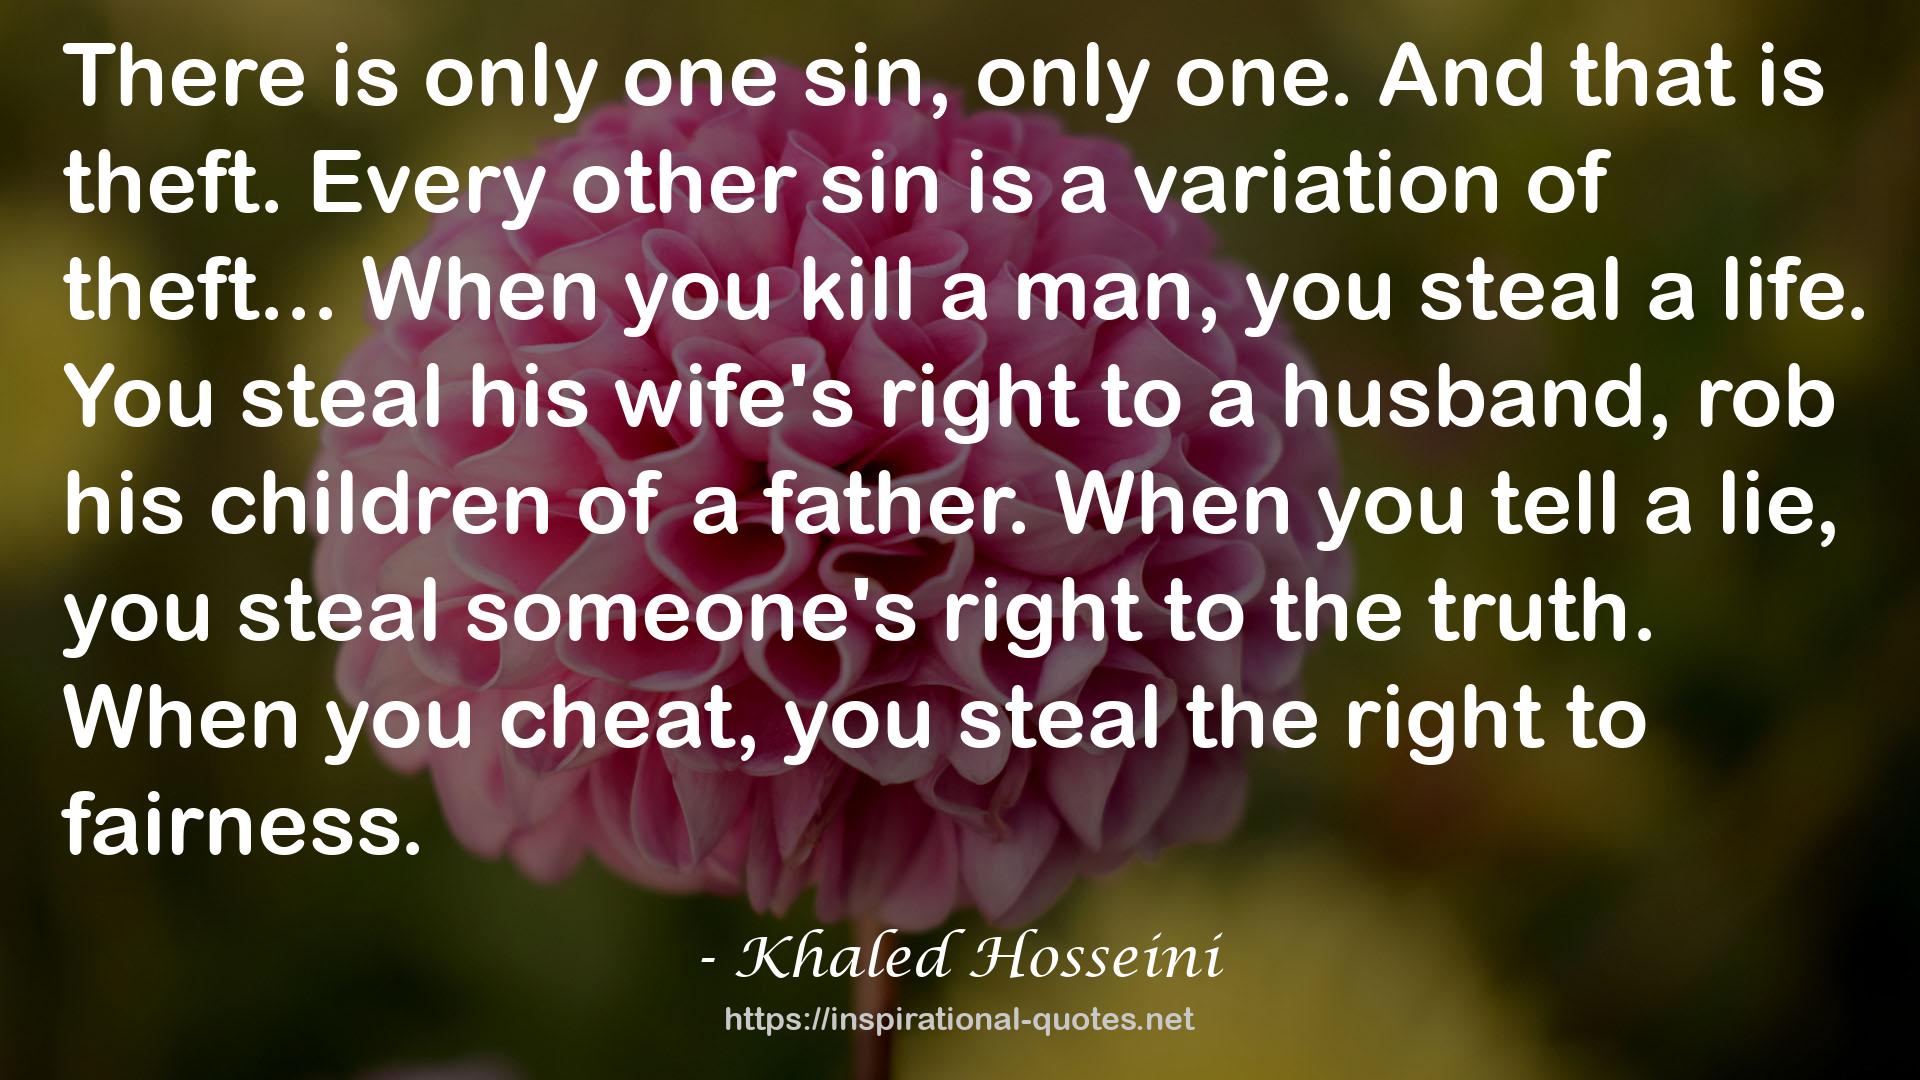 his wife's right  QUOTES